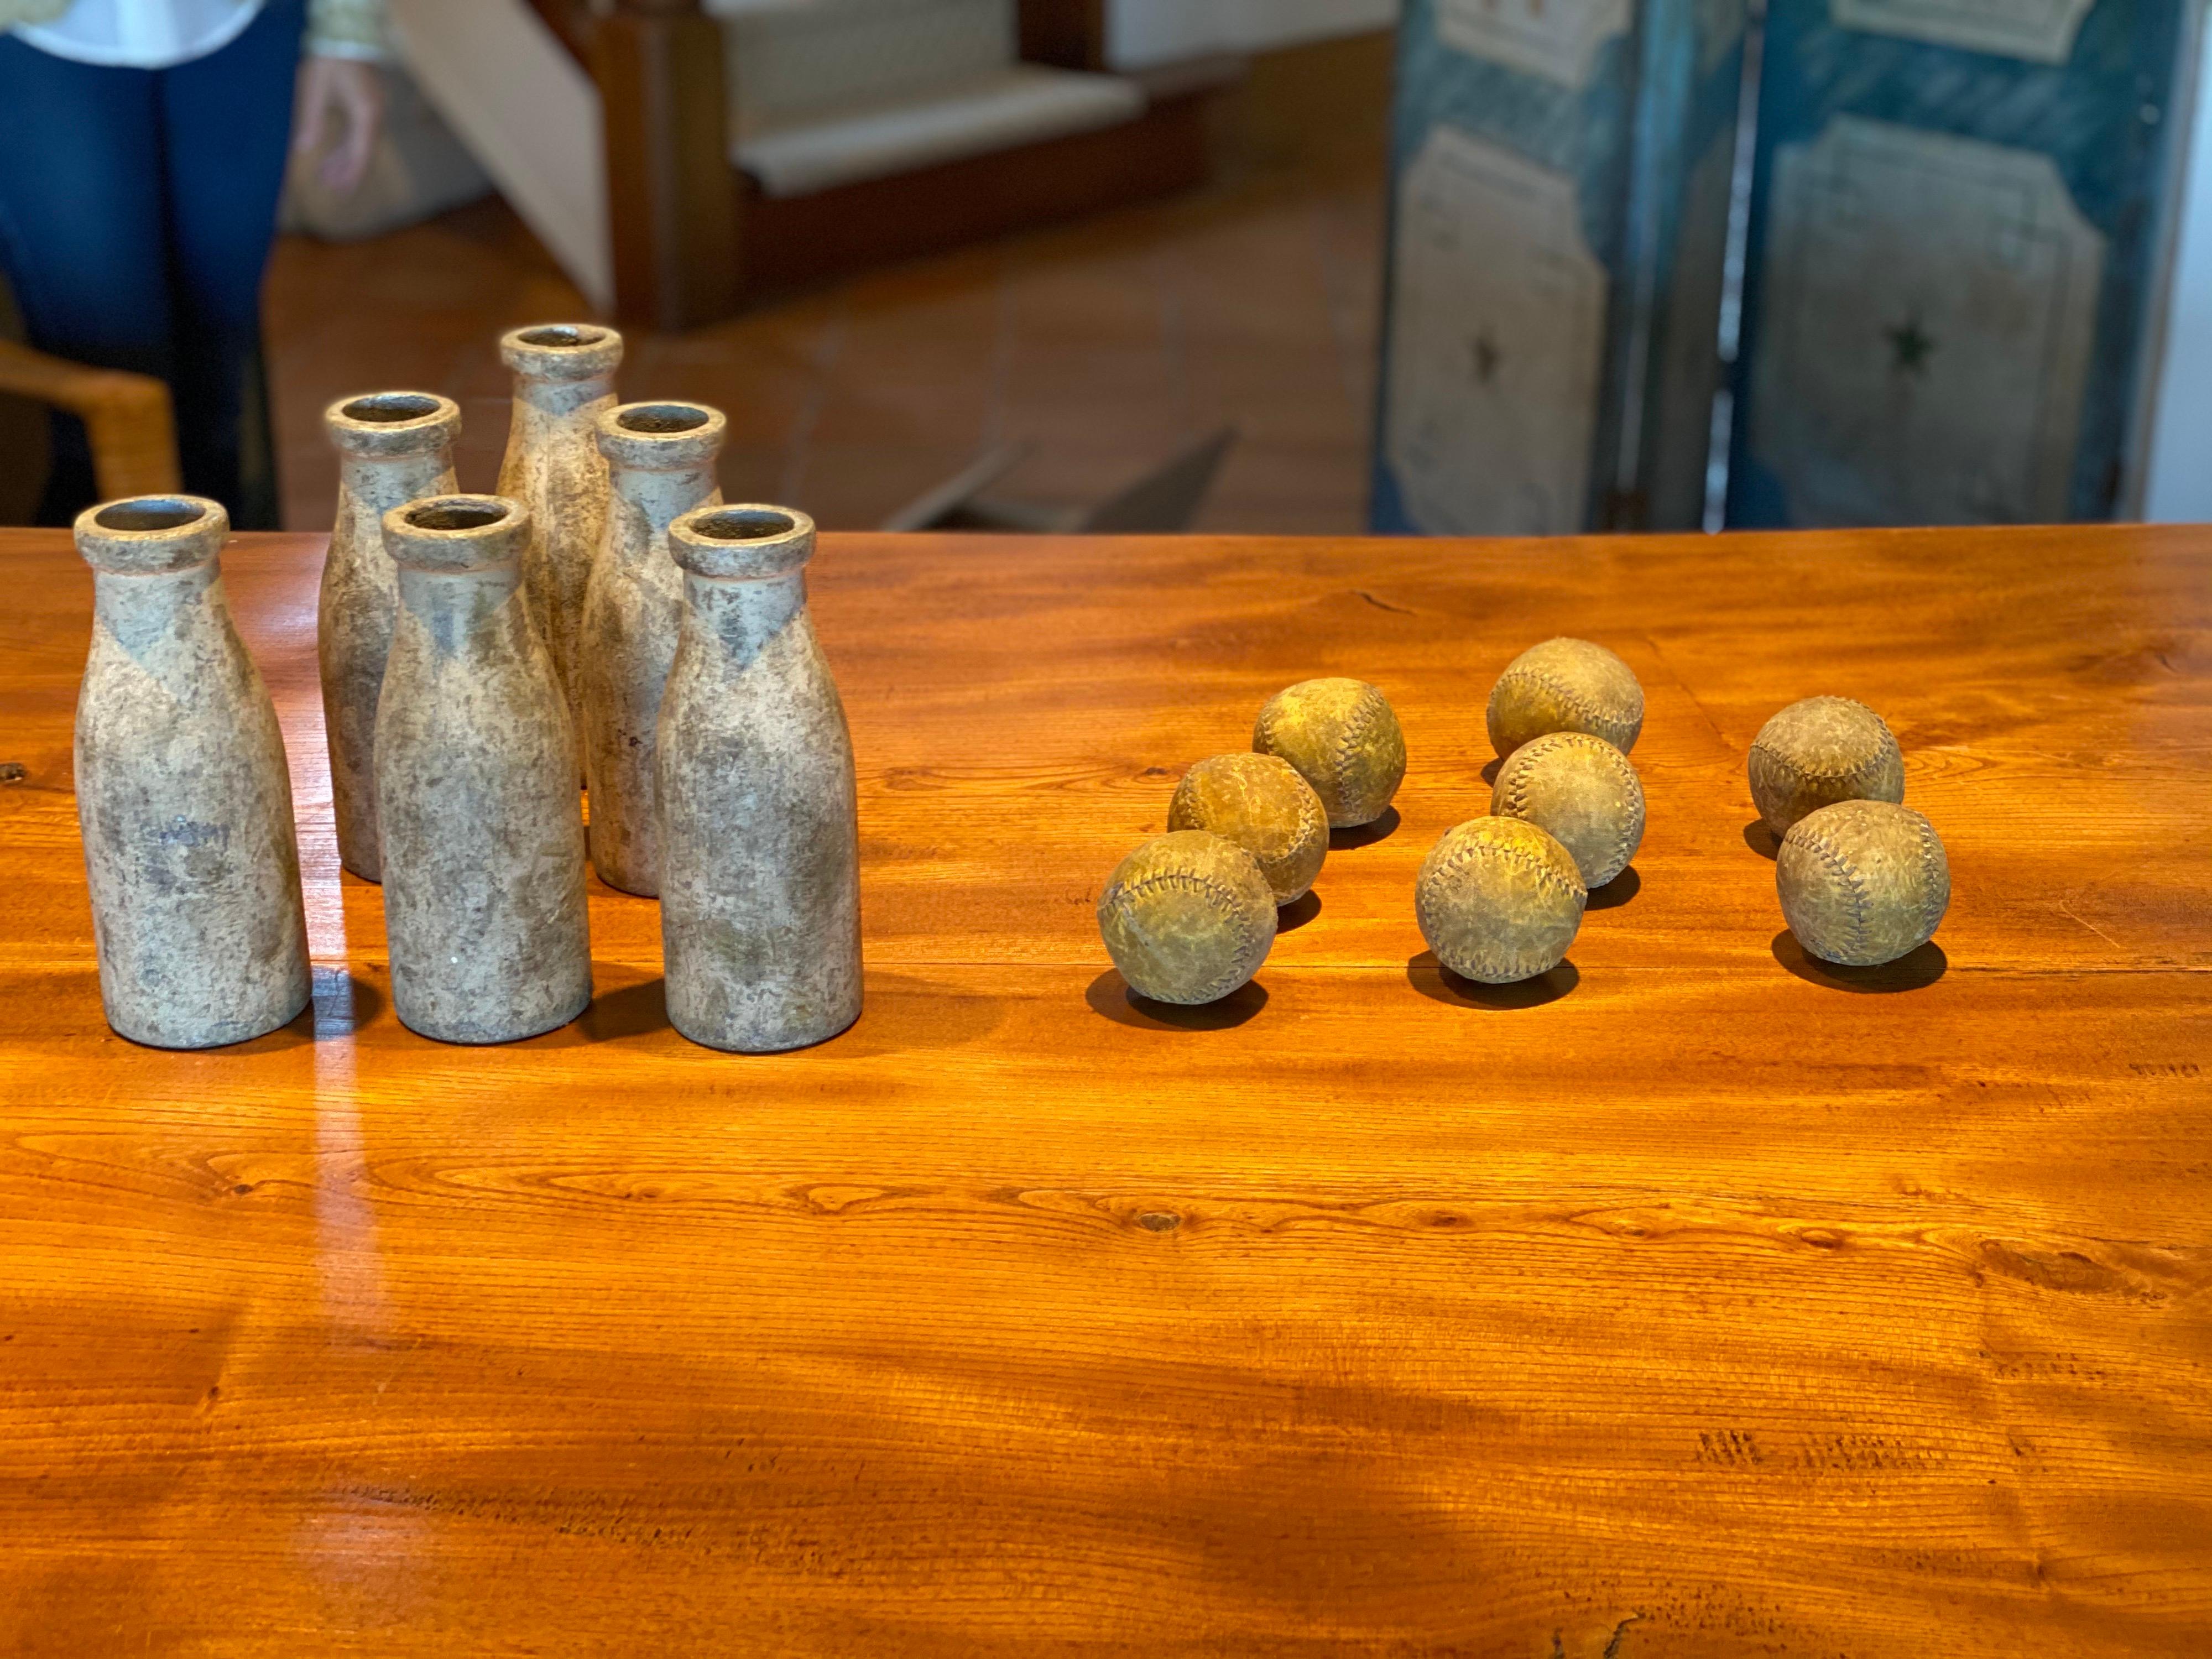 A set of six lawn bowling pins and six balls,
20th century
Pins molded in metal.
Overall fair condition, all well used

Measurements:
Pins x 6
Height 8 in
Width 3in

Balls x 8
Depth 2.5 in.